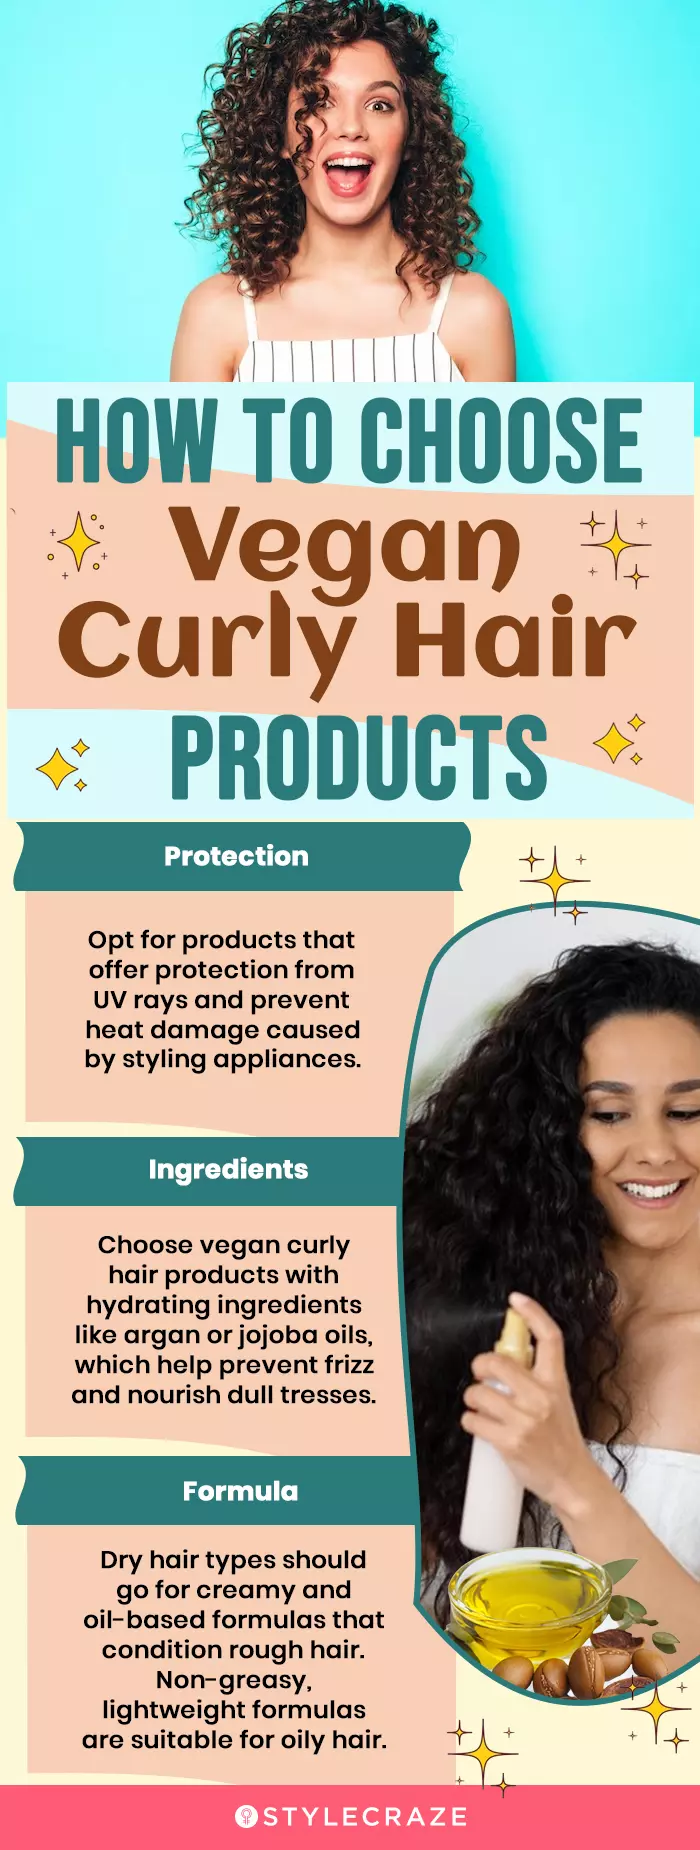 How To Choose Vegan Curly Hair Products